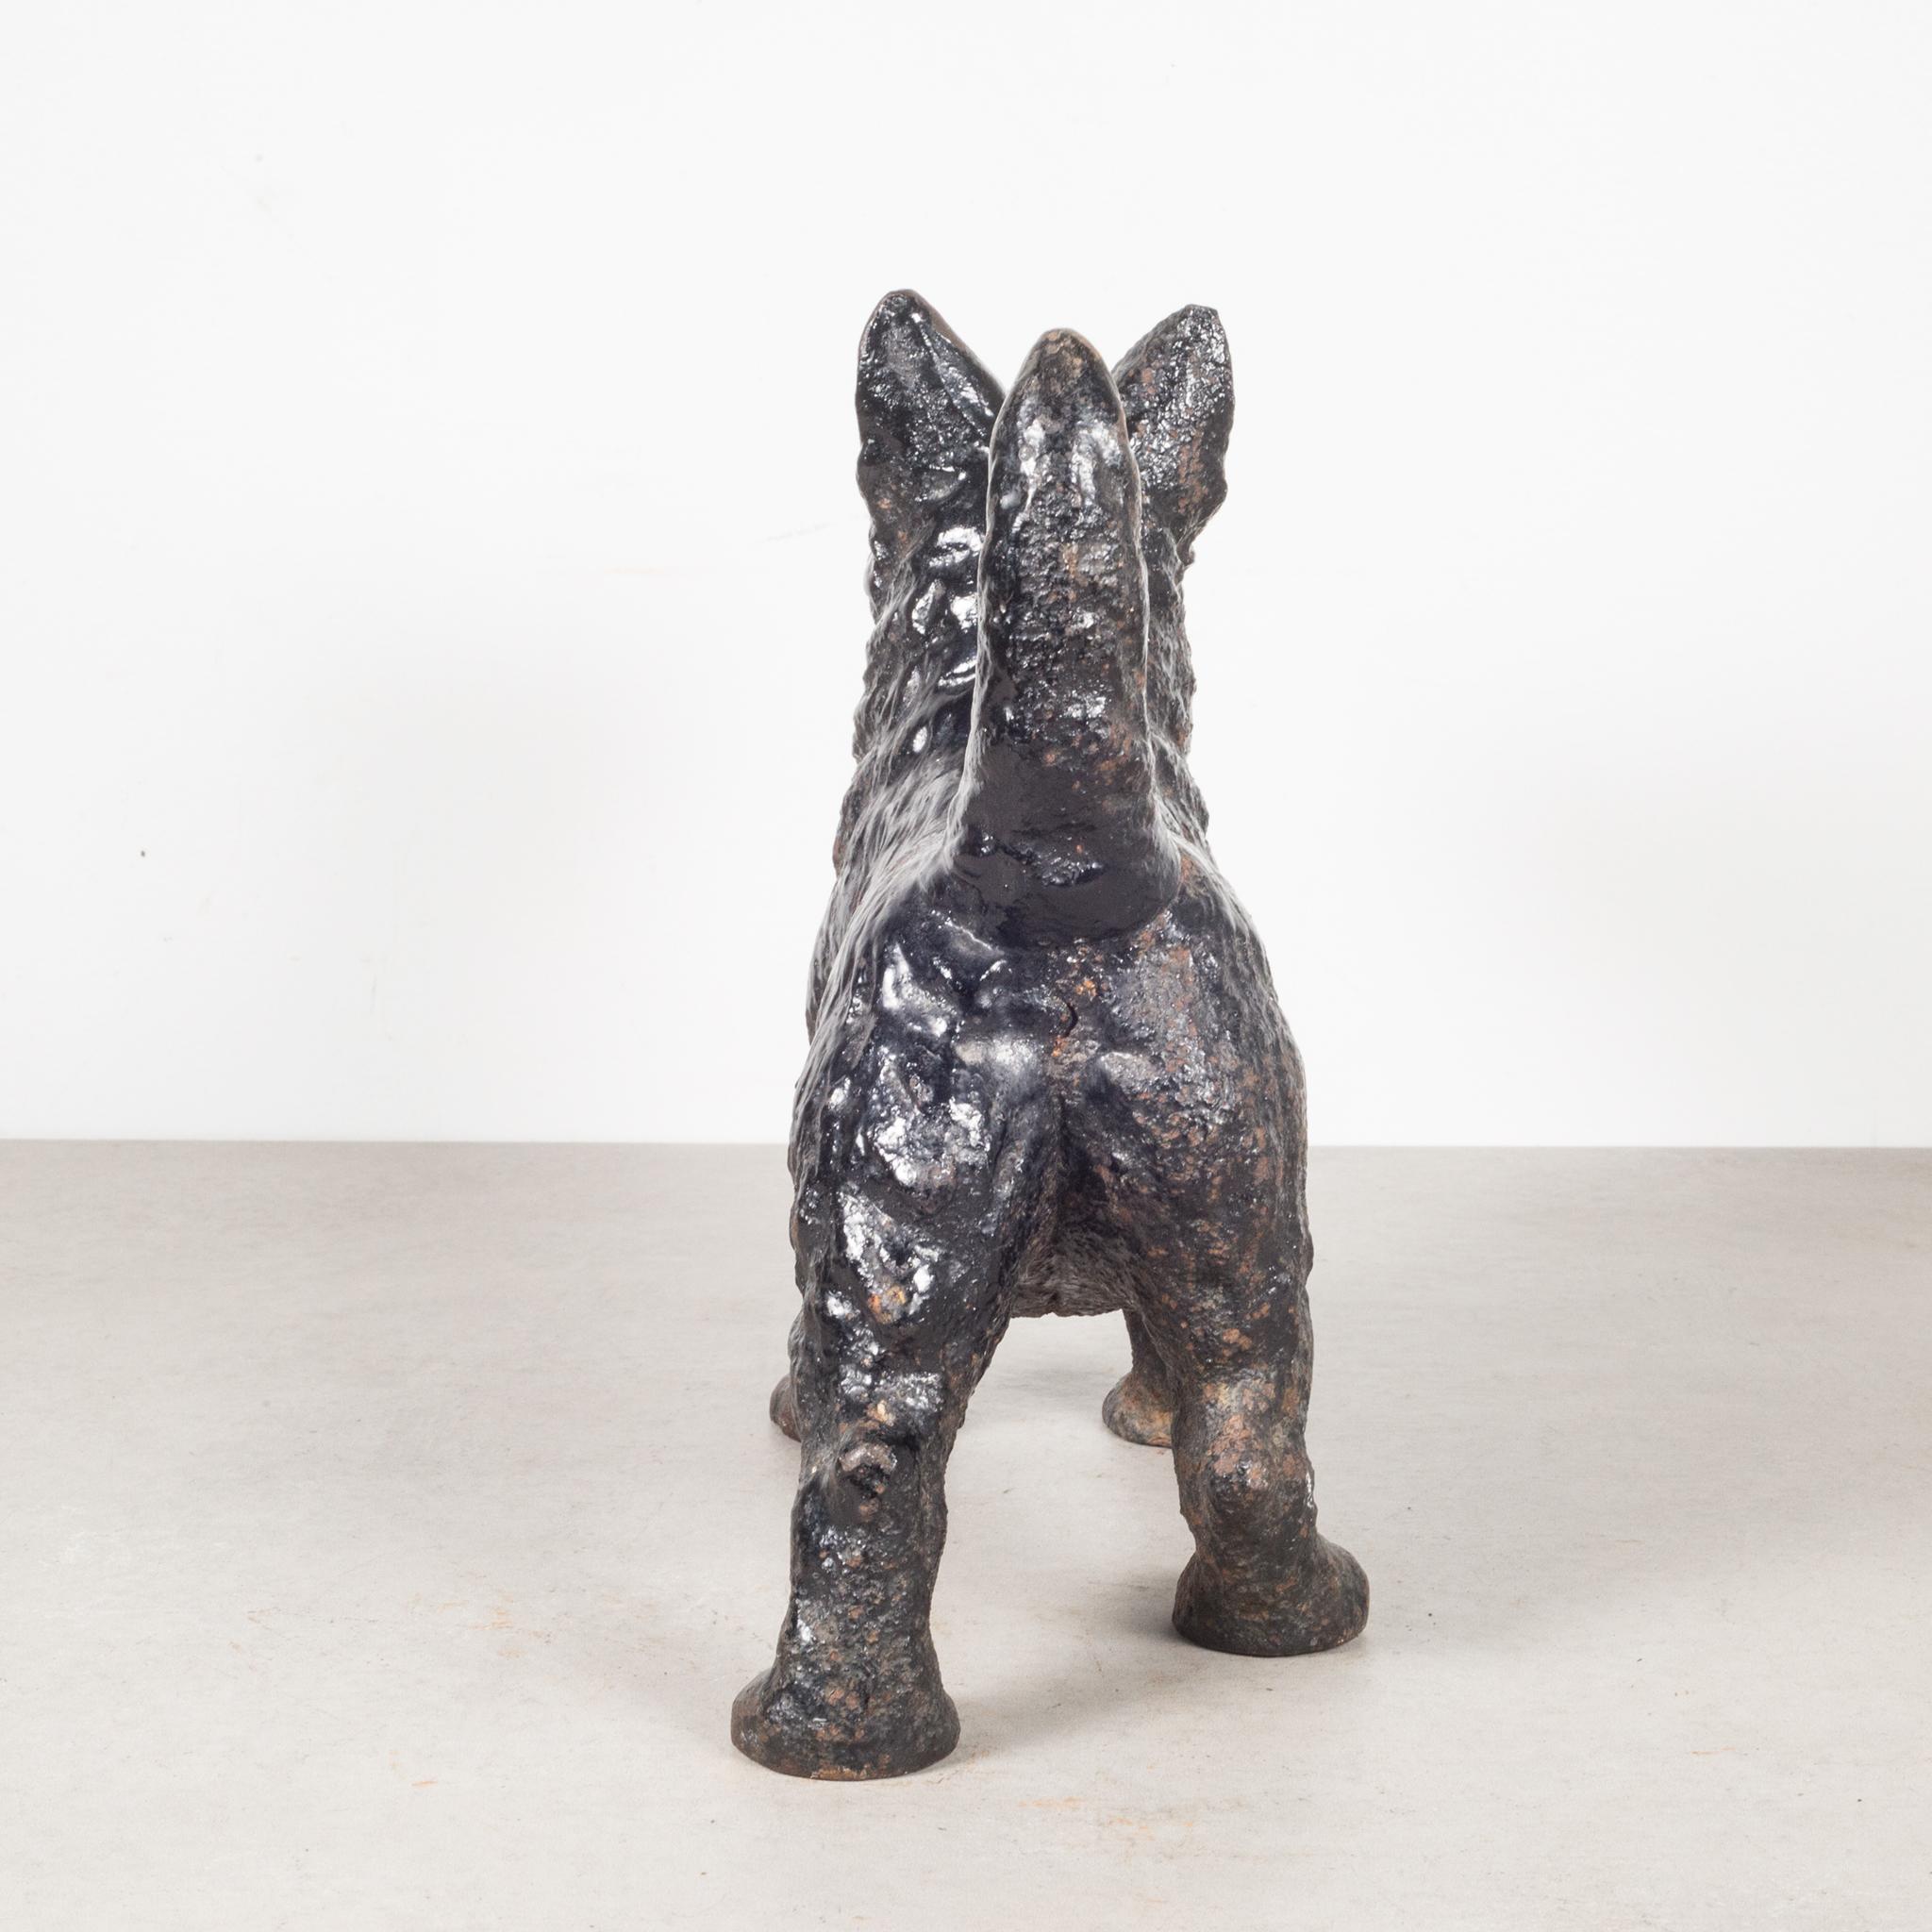 20th Century Early 20th C. Cast Iron Scottish Terrier Doorstop by Hubley, c.1910-1940